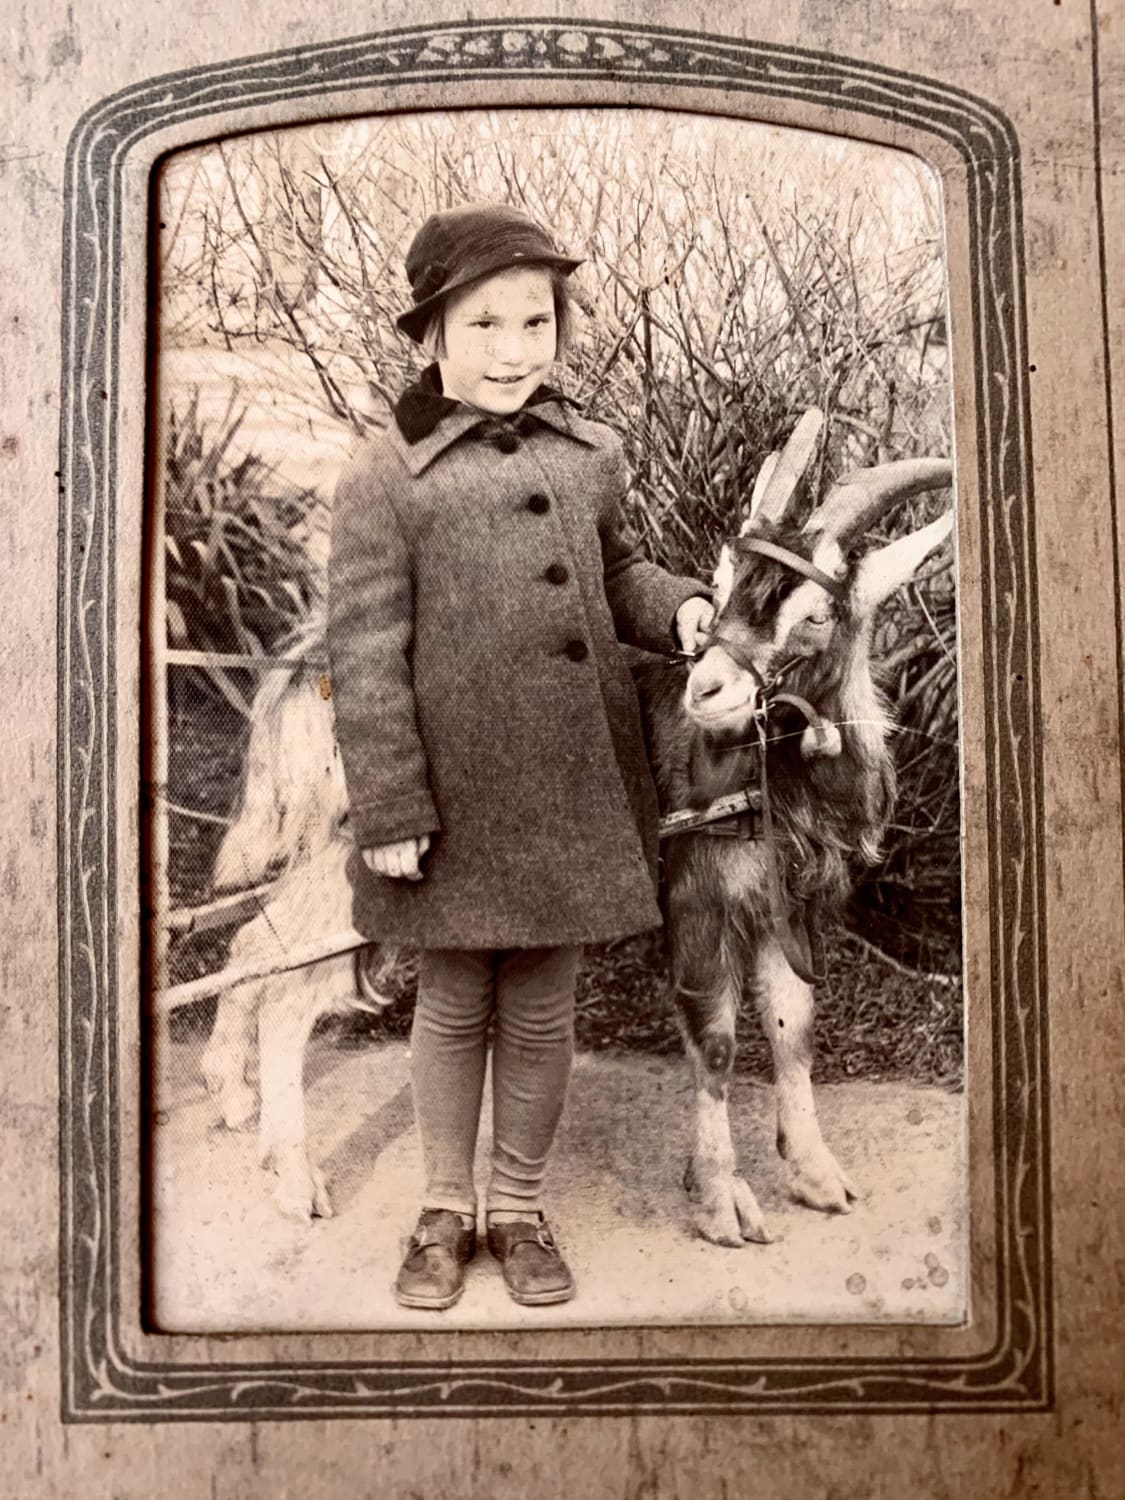 Everyone is posting their pony pictures... so here’s my Grandma Pearl circa 1934 with a very snazzy goat